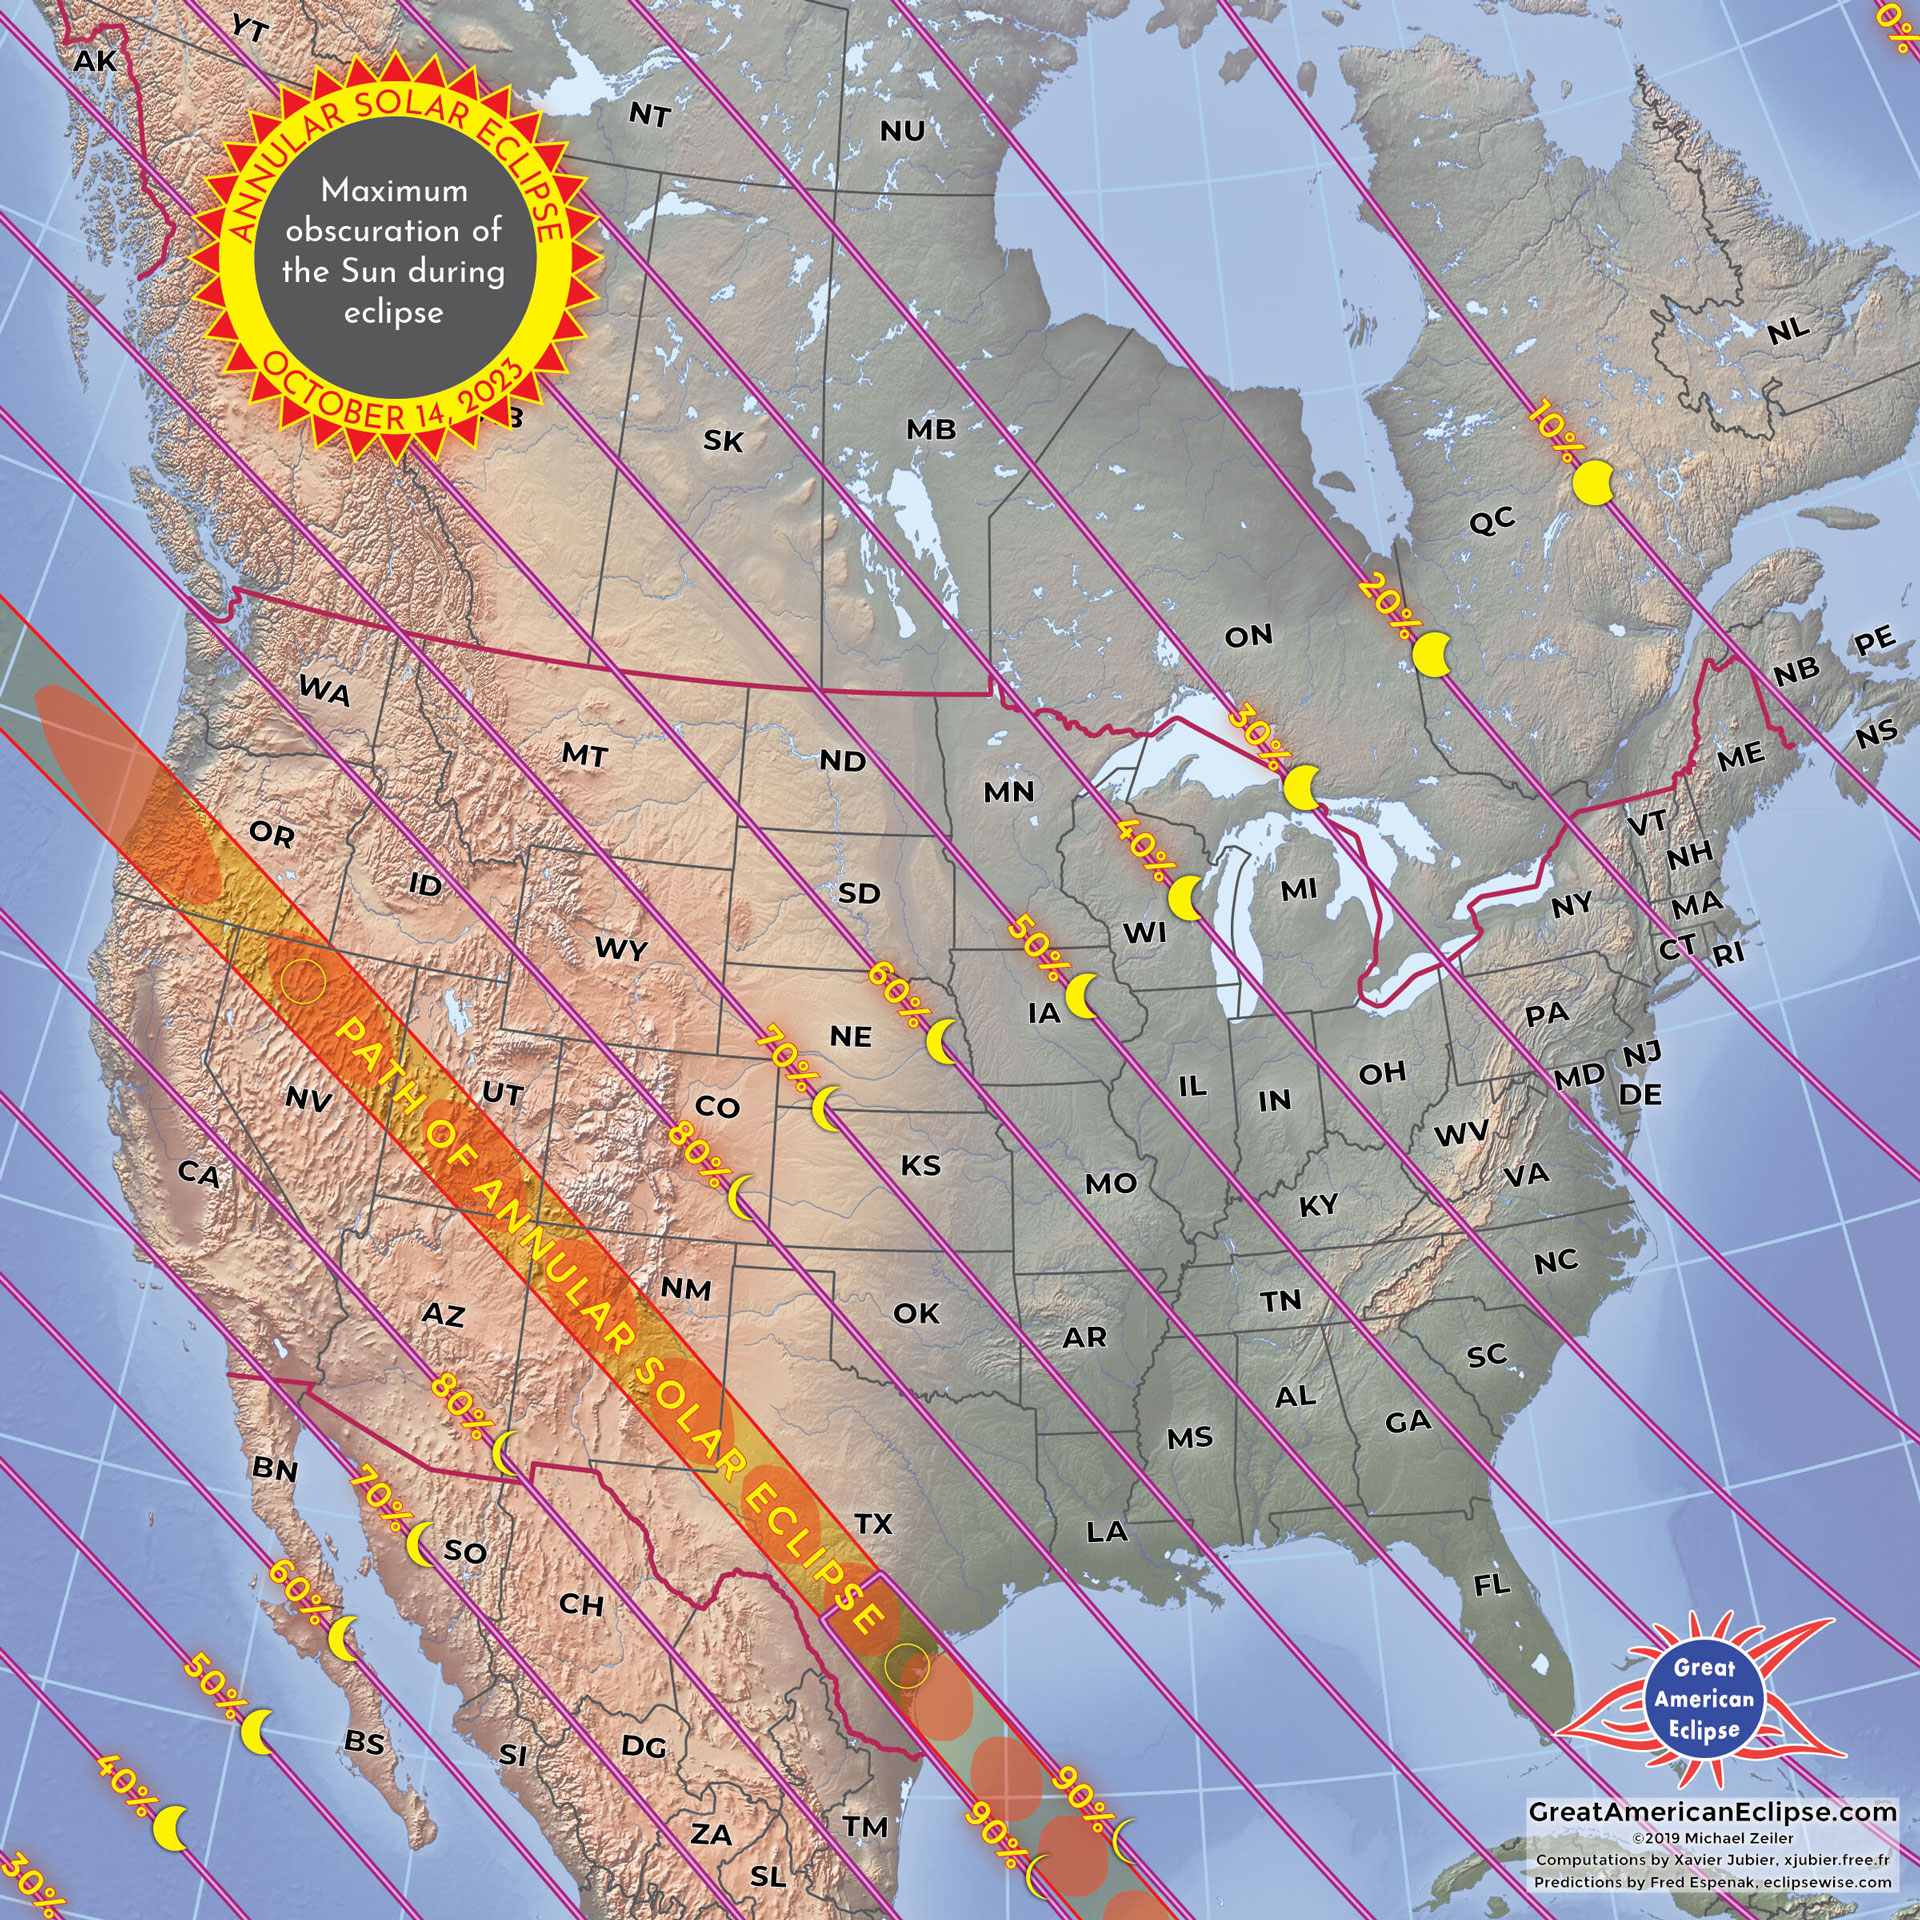 Map of North America showing the path of the annular solar eclipse.